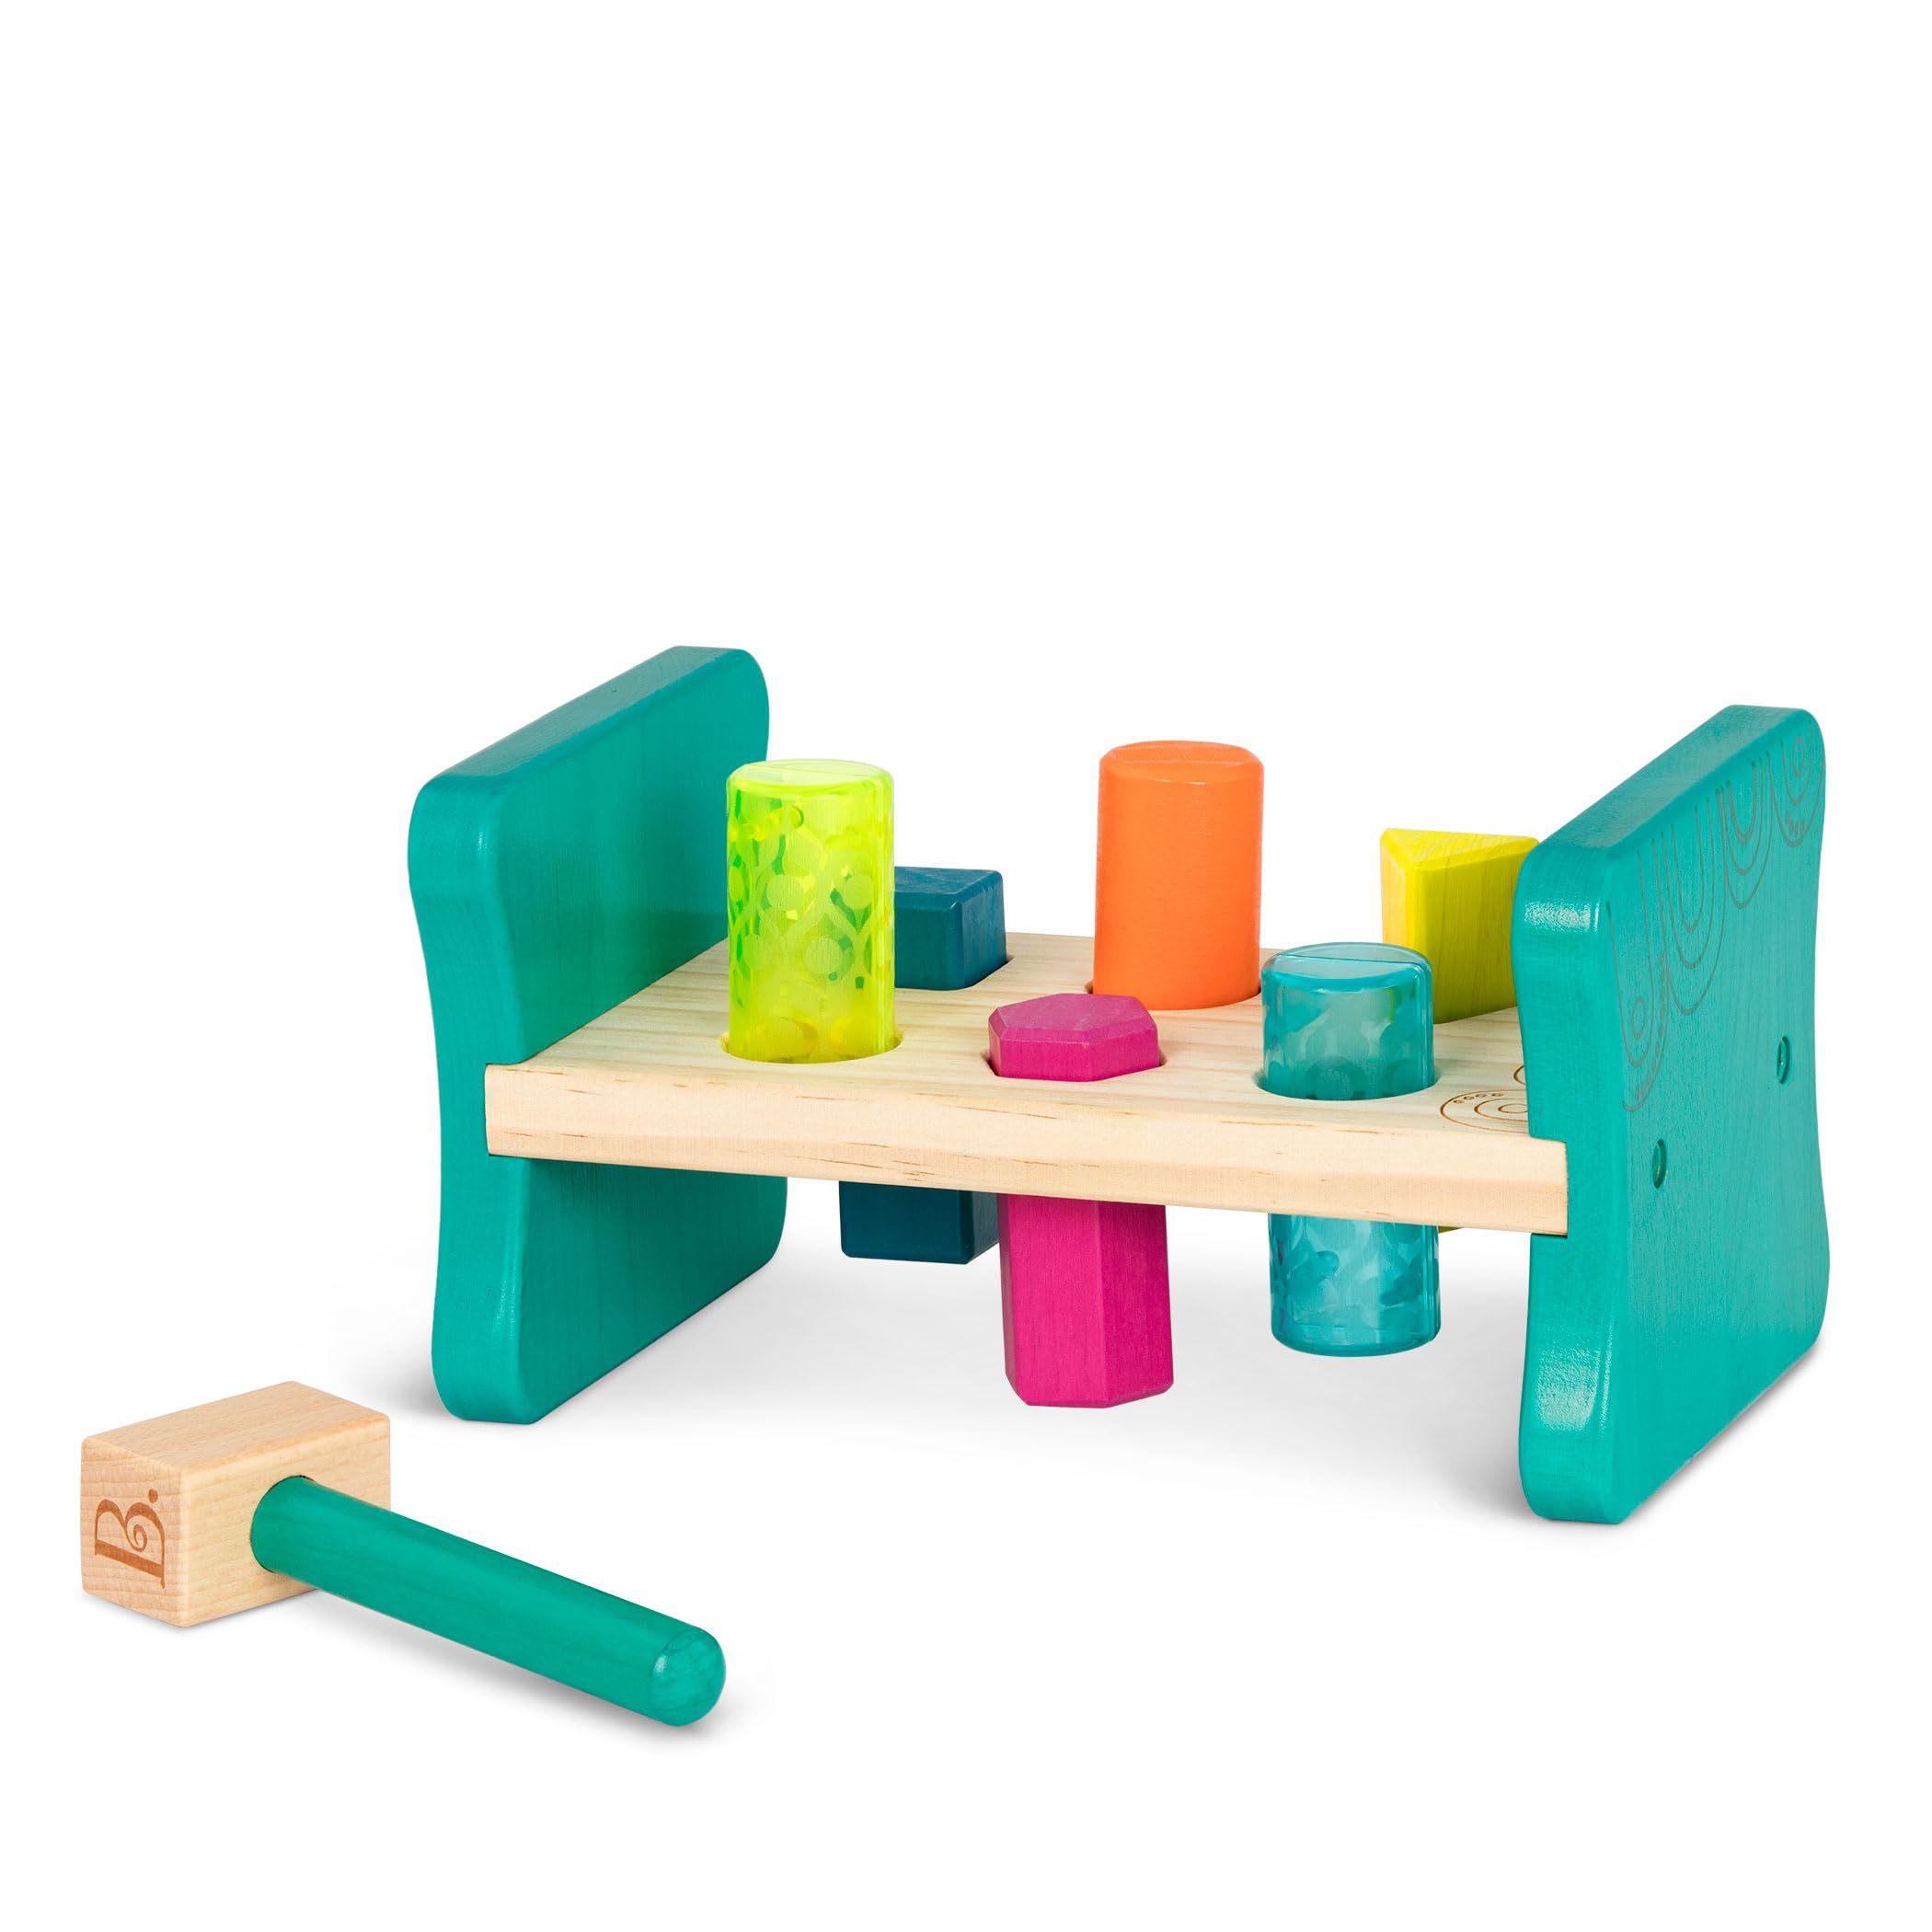 B. toys – Wooden Shape Sorter – Pounding Bench For Shape Sorting – 6 Pegs & Toy Hammer – Classic Toys For Toddlers, Kids – 2 Years + – Colorful Pound & Play